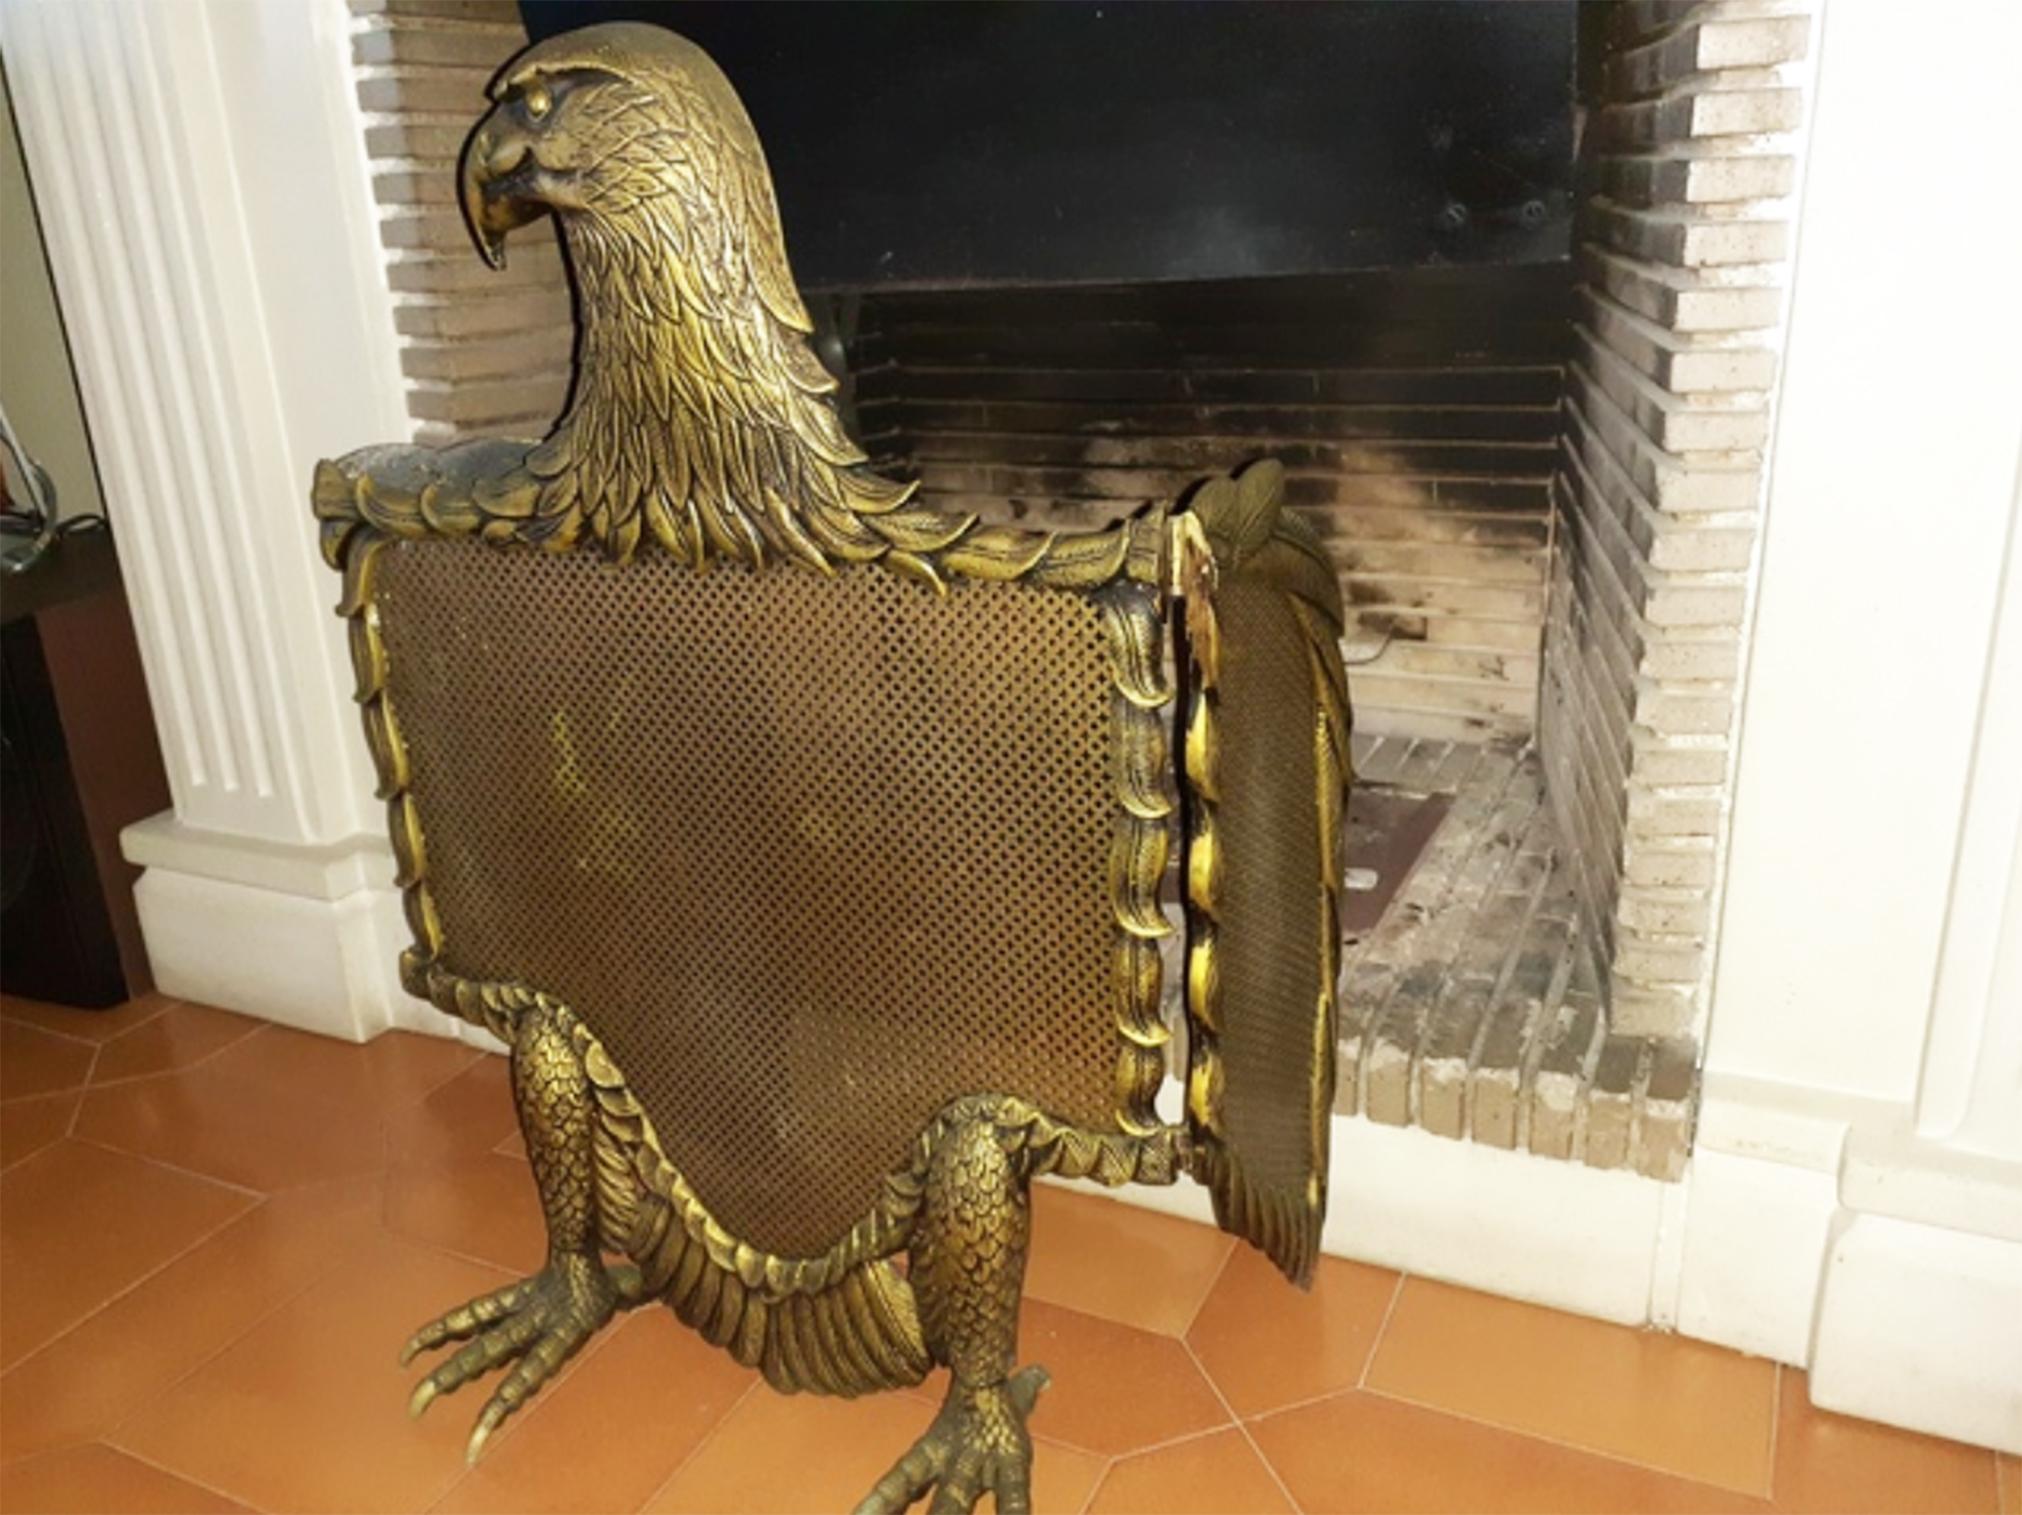 Three-panel fire screen bronze or brass eagle-shaped sparks

Save bronze or brass eagle-shaped sparks with open wings that fold.